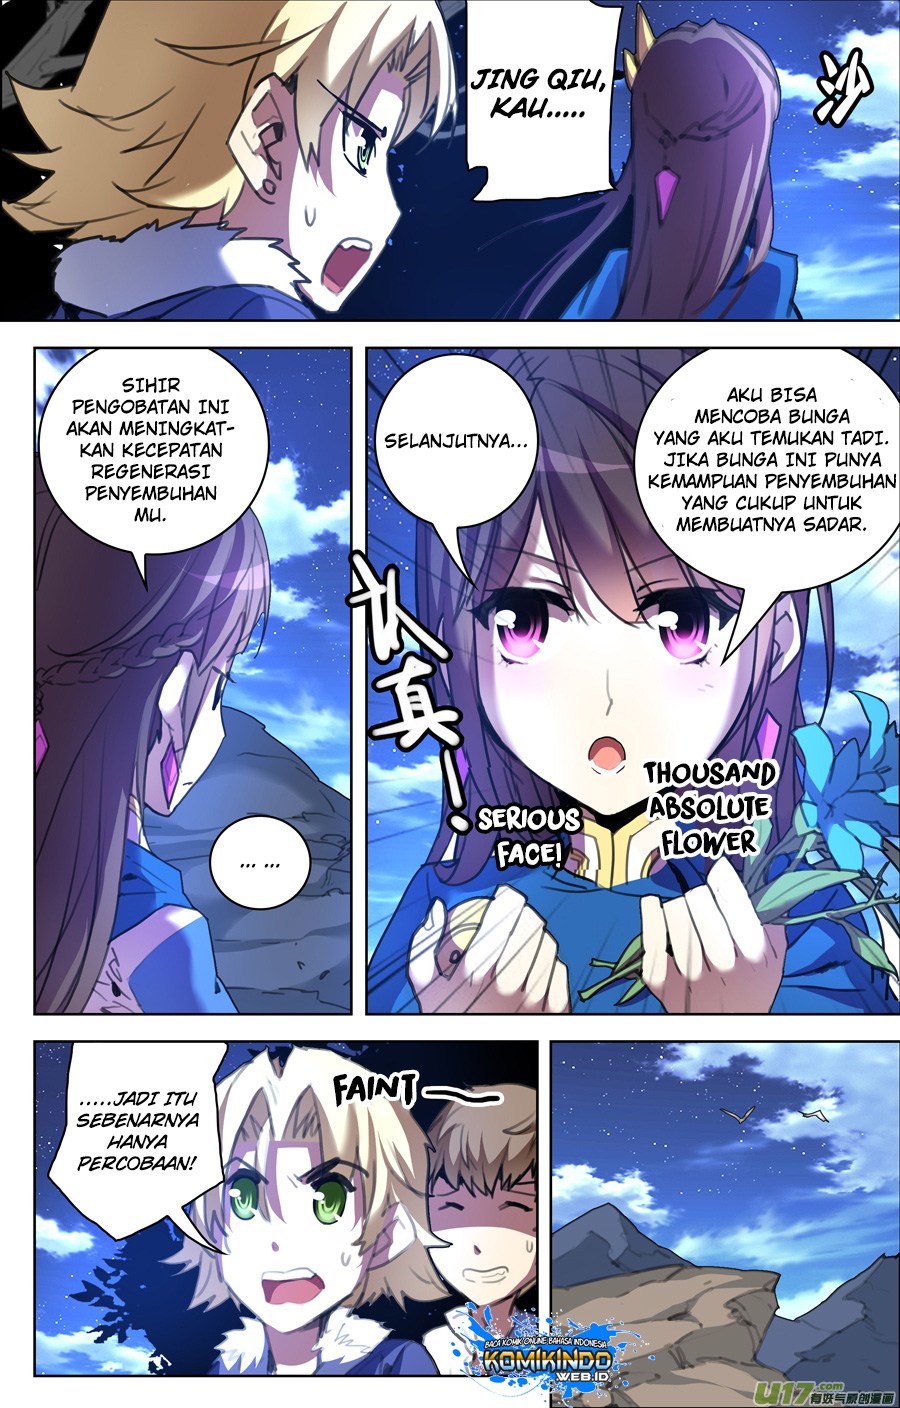 Lord Xue Ying Chapter 09.2